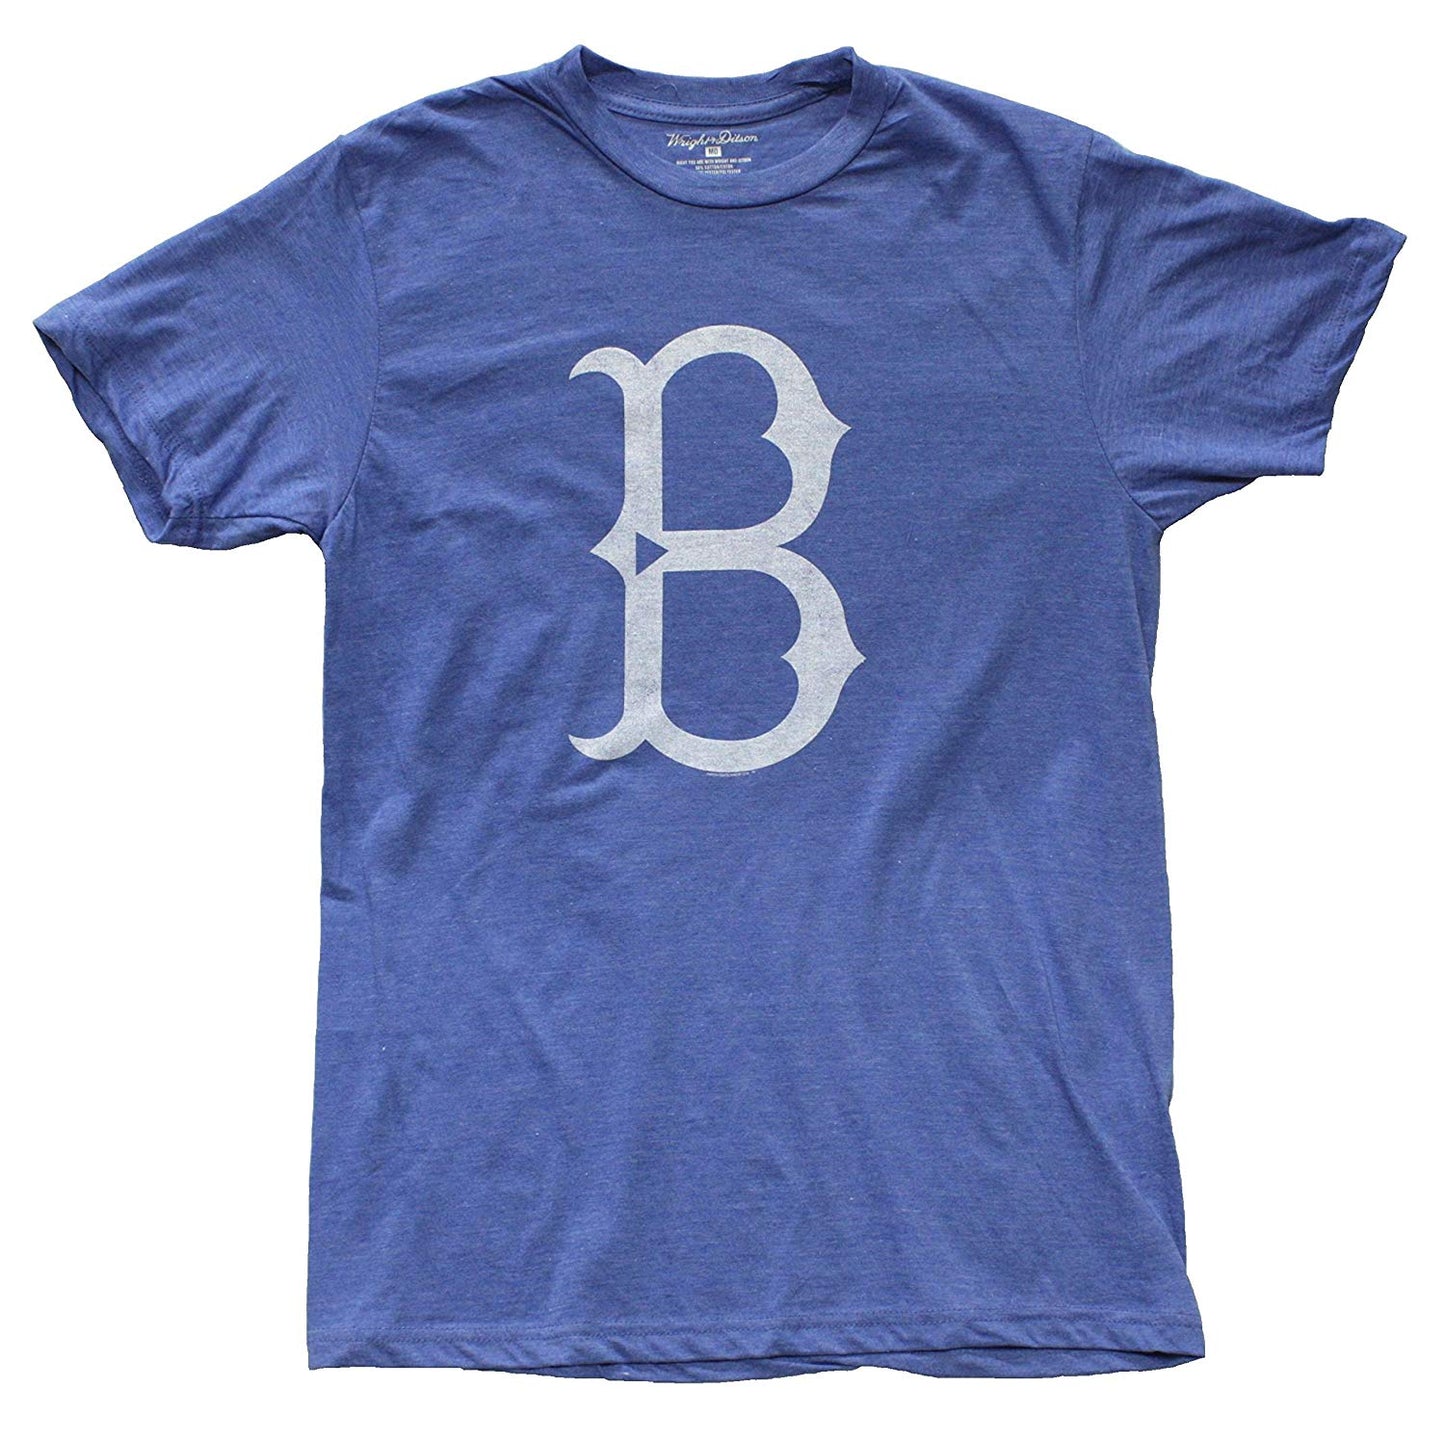 MLB Brooklyn Dodgers Heathered Vintage Soft T-Shirt by Wright & Ditson